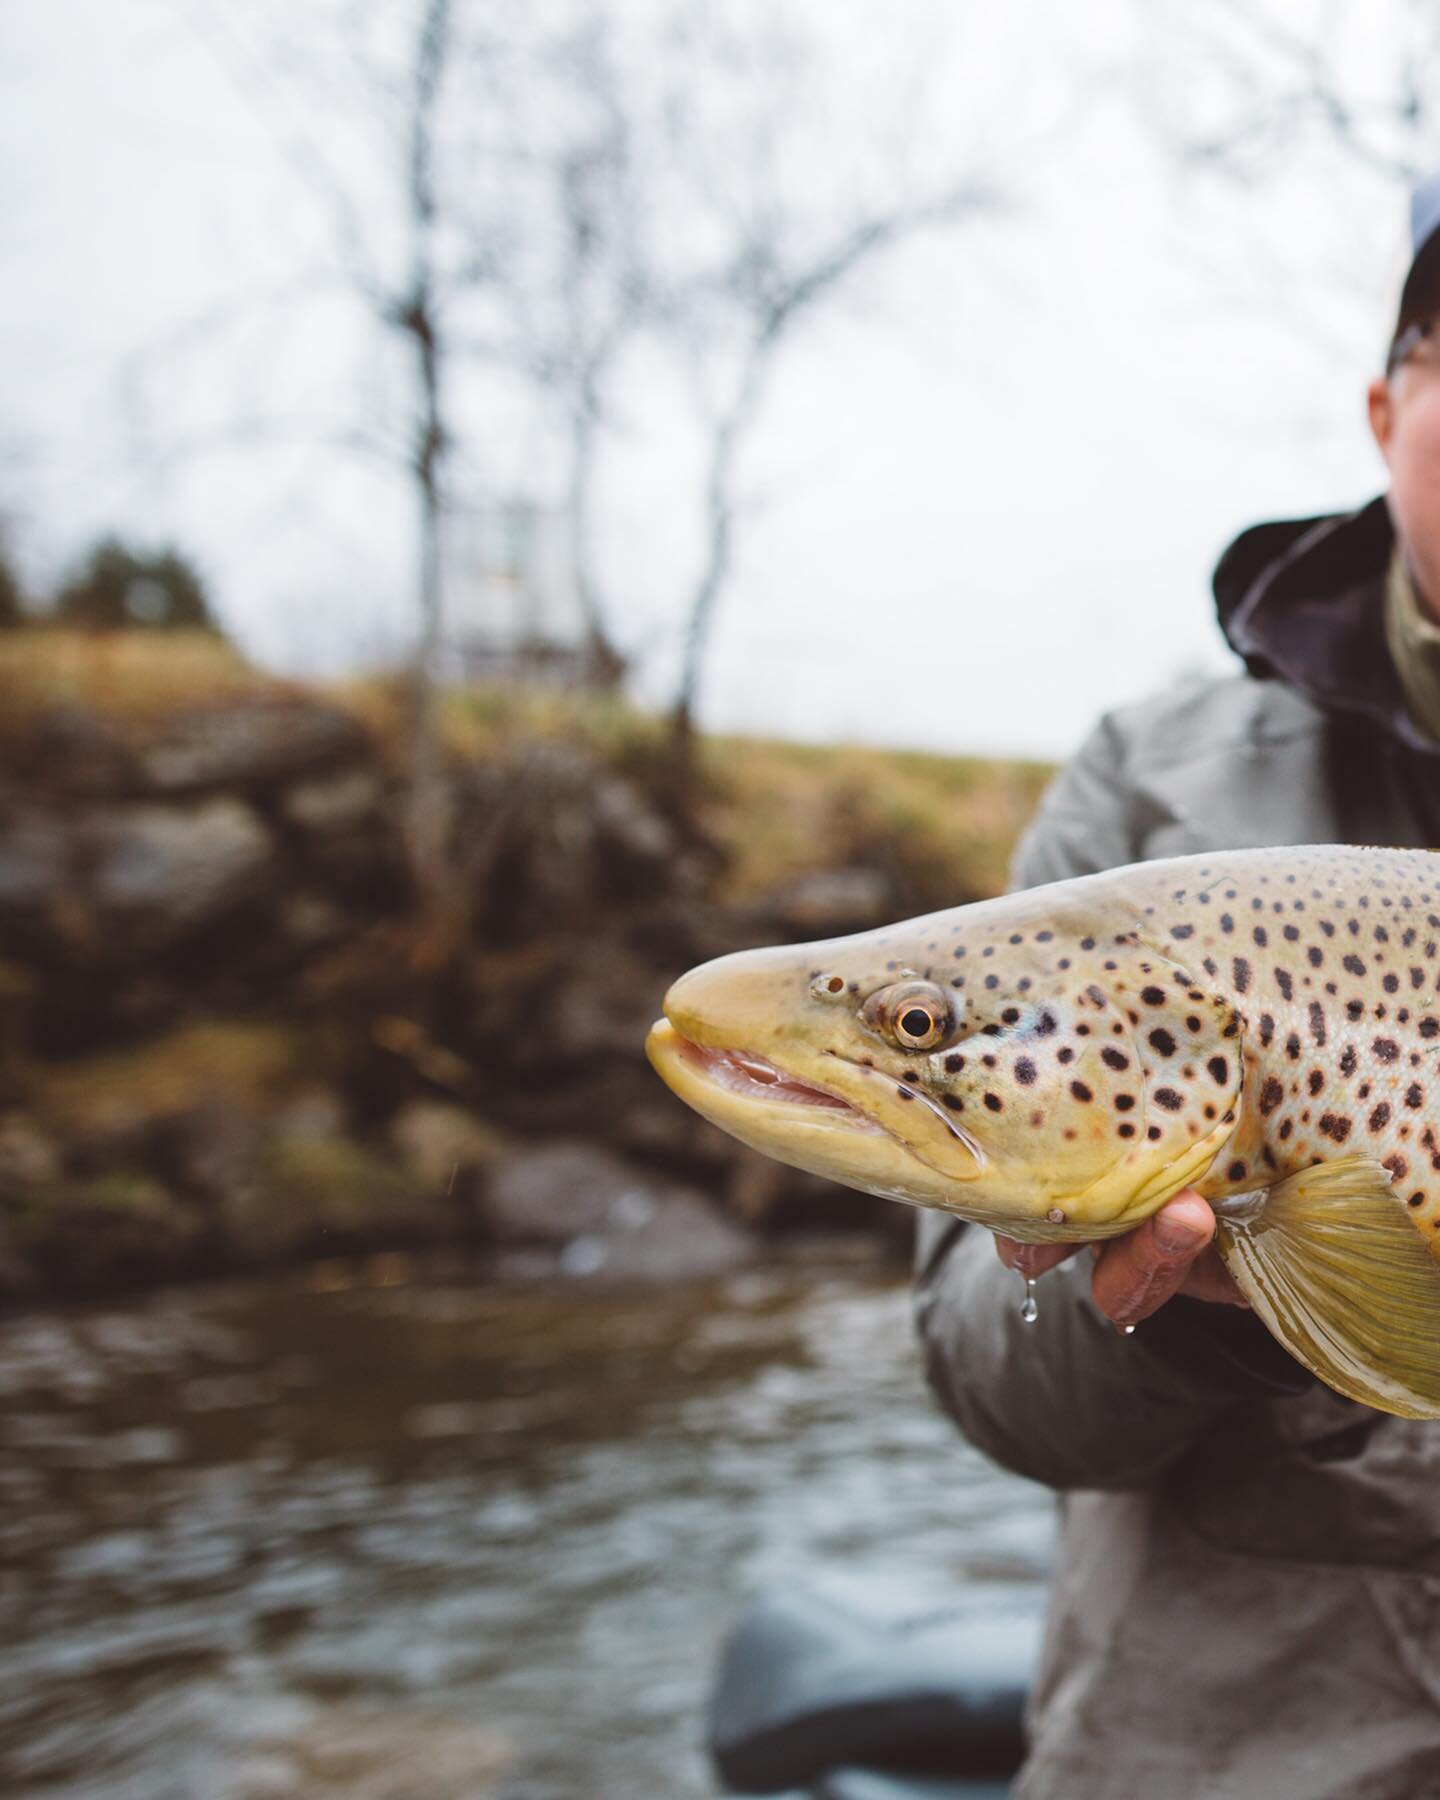 We managed to last longer than everyone else yesterday in the rain and sleet, and when the boats cleared out, the bite went crazy. Over 40 browns landed, with several of these big bruisers. This has been an incredible winter bite that keeps hanging o